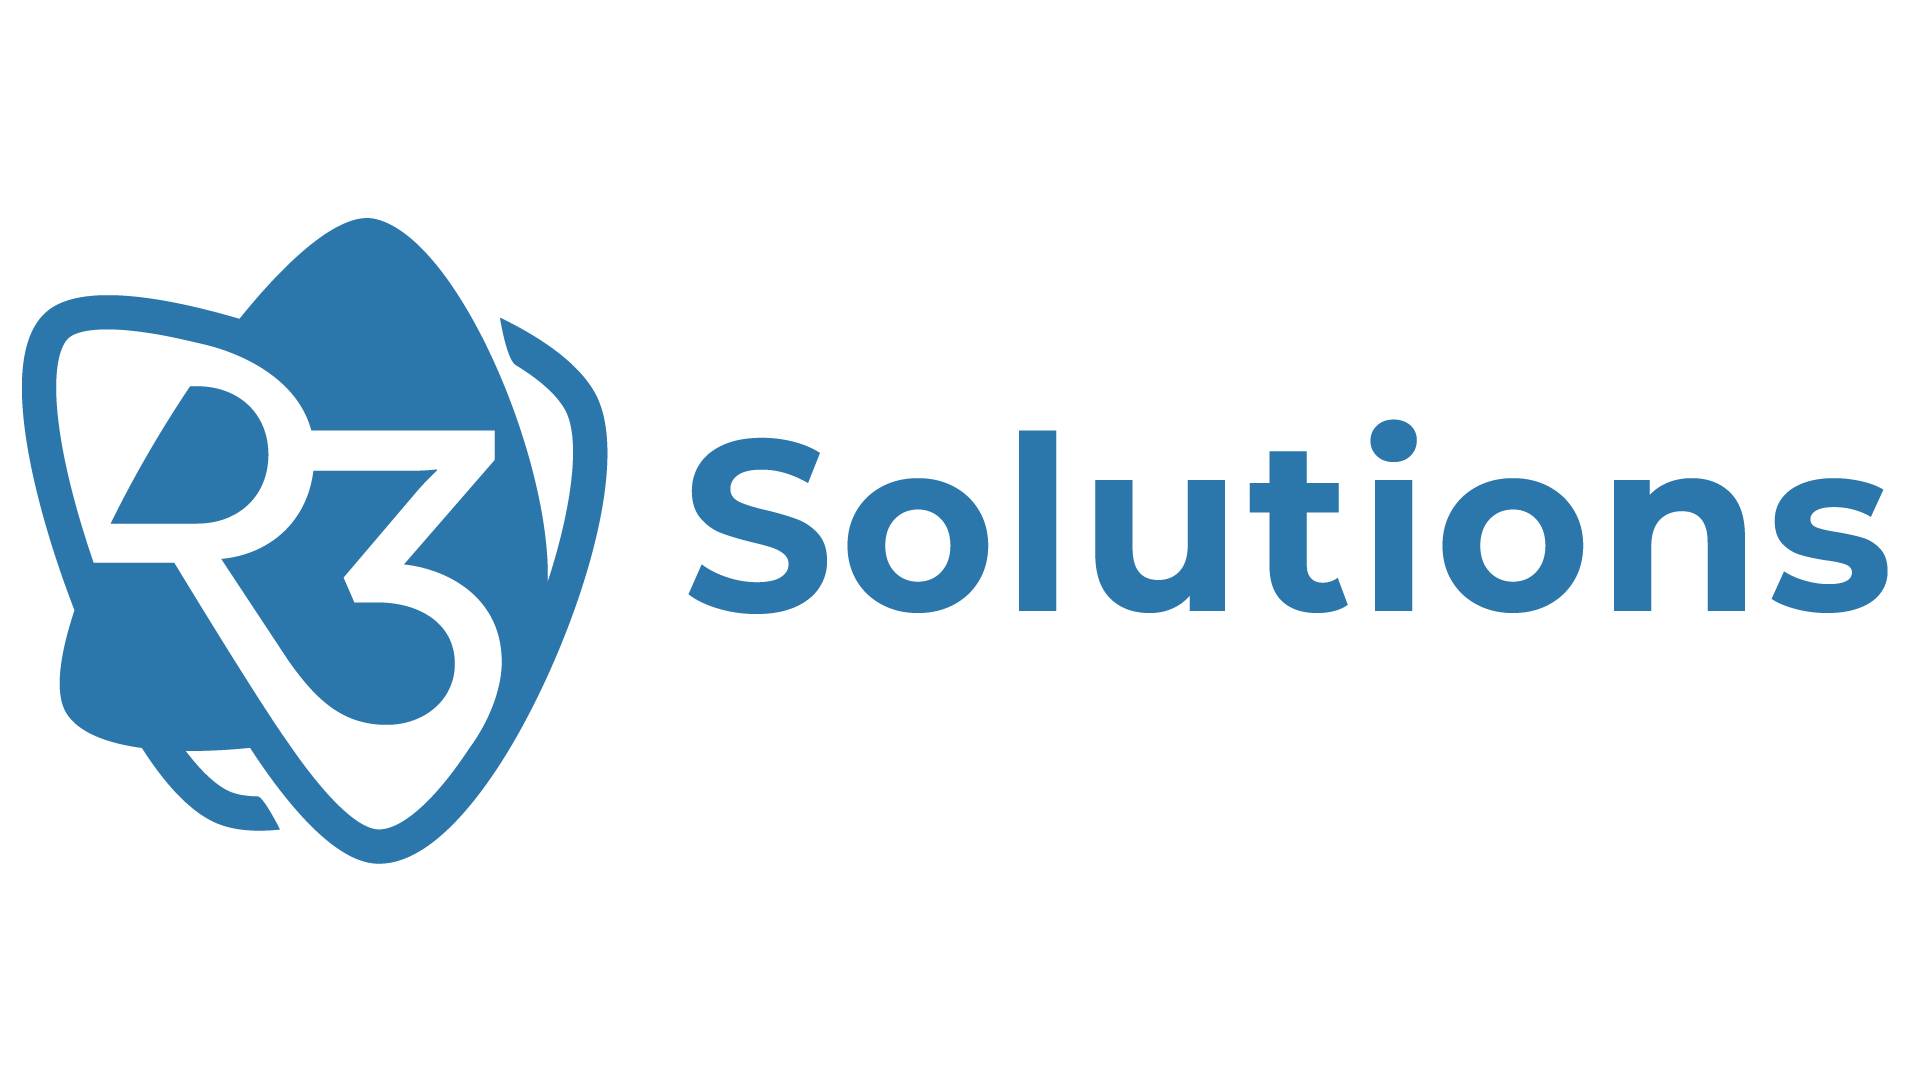 R3 Solutions and u-blox